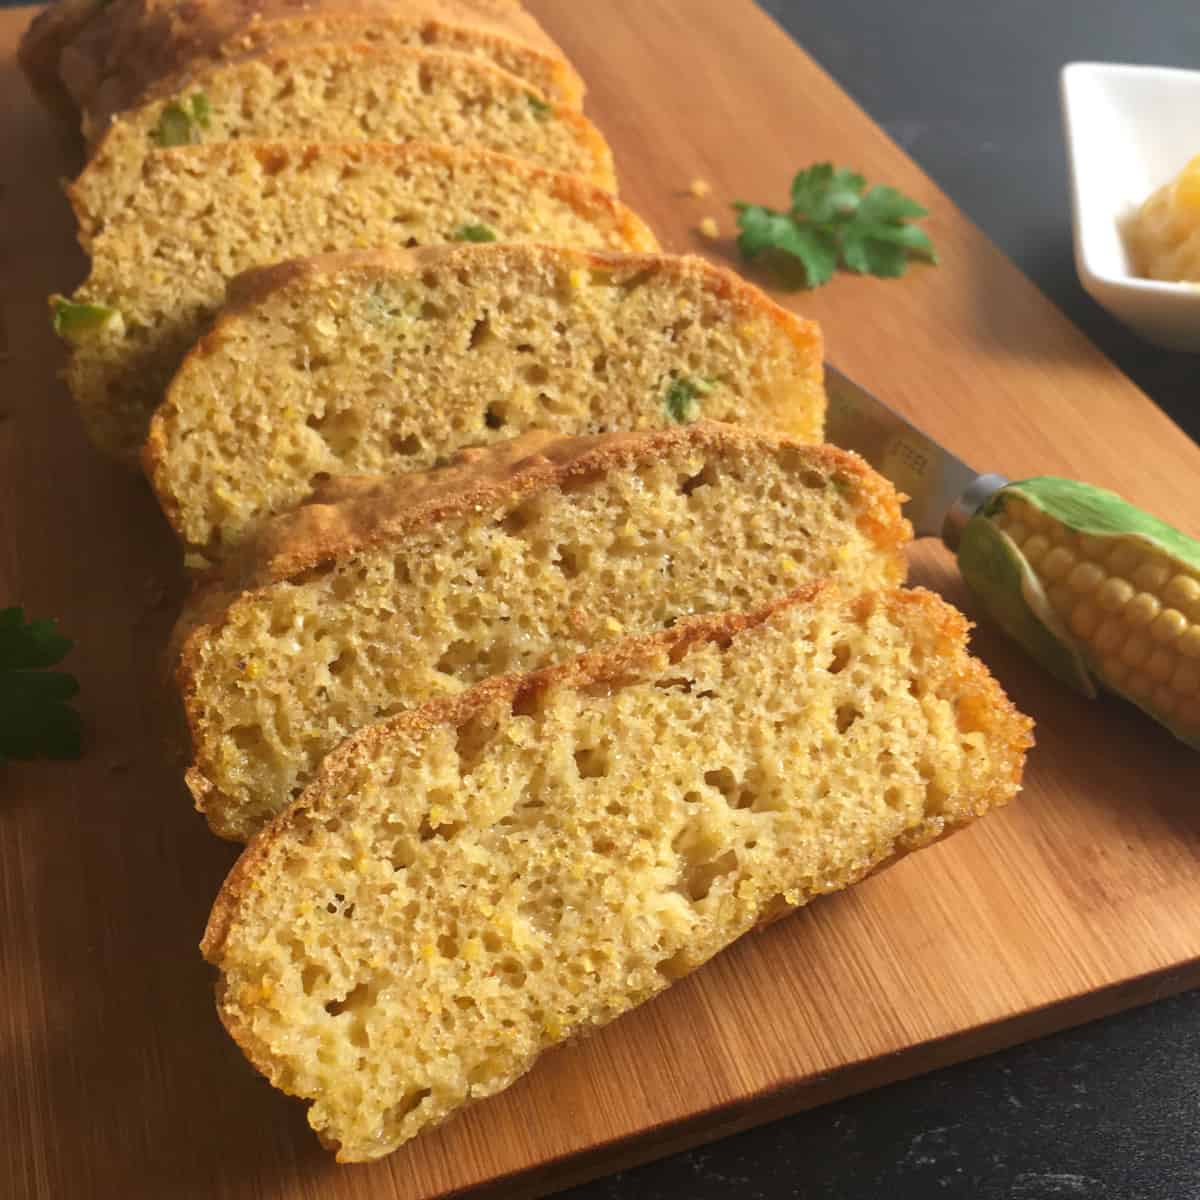 corn bread cooked in air fryer